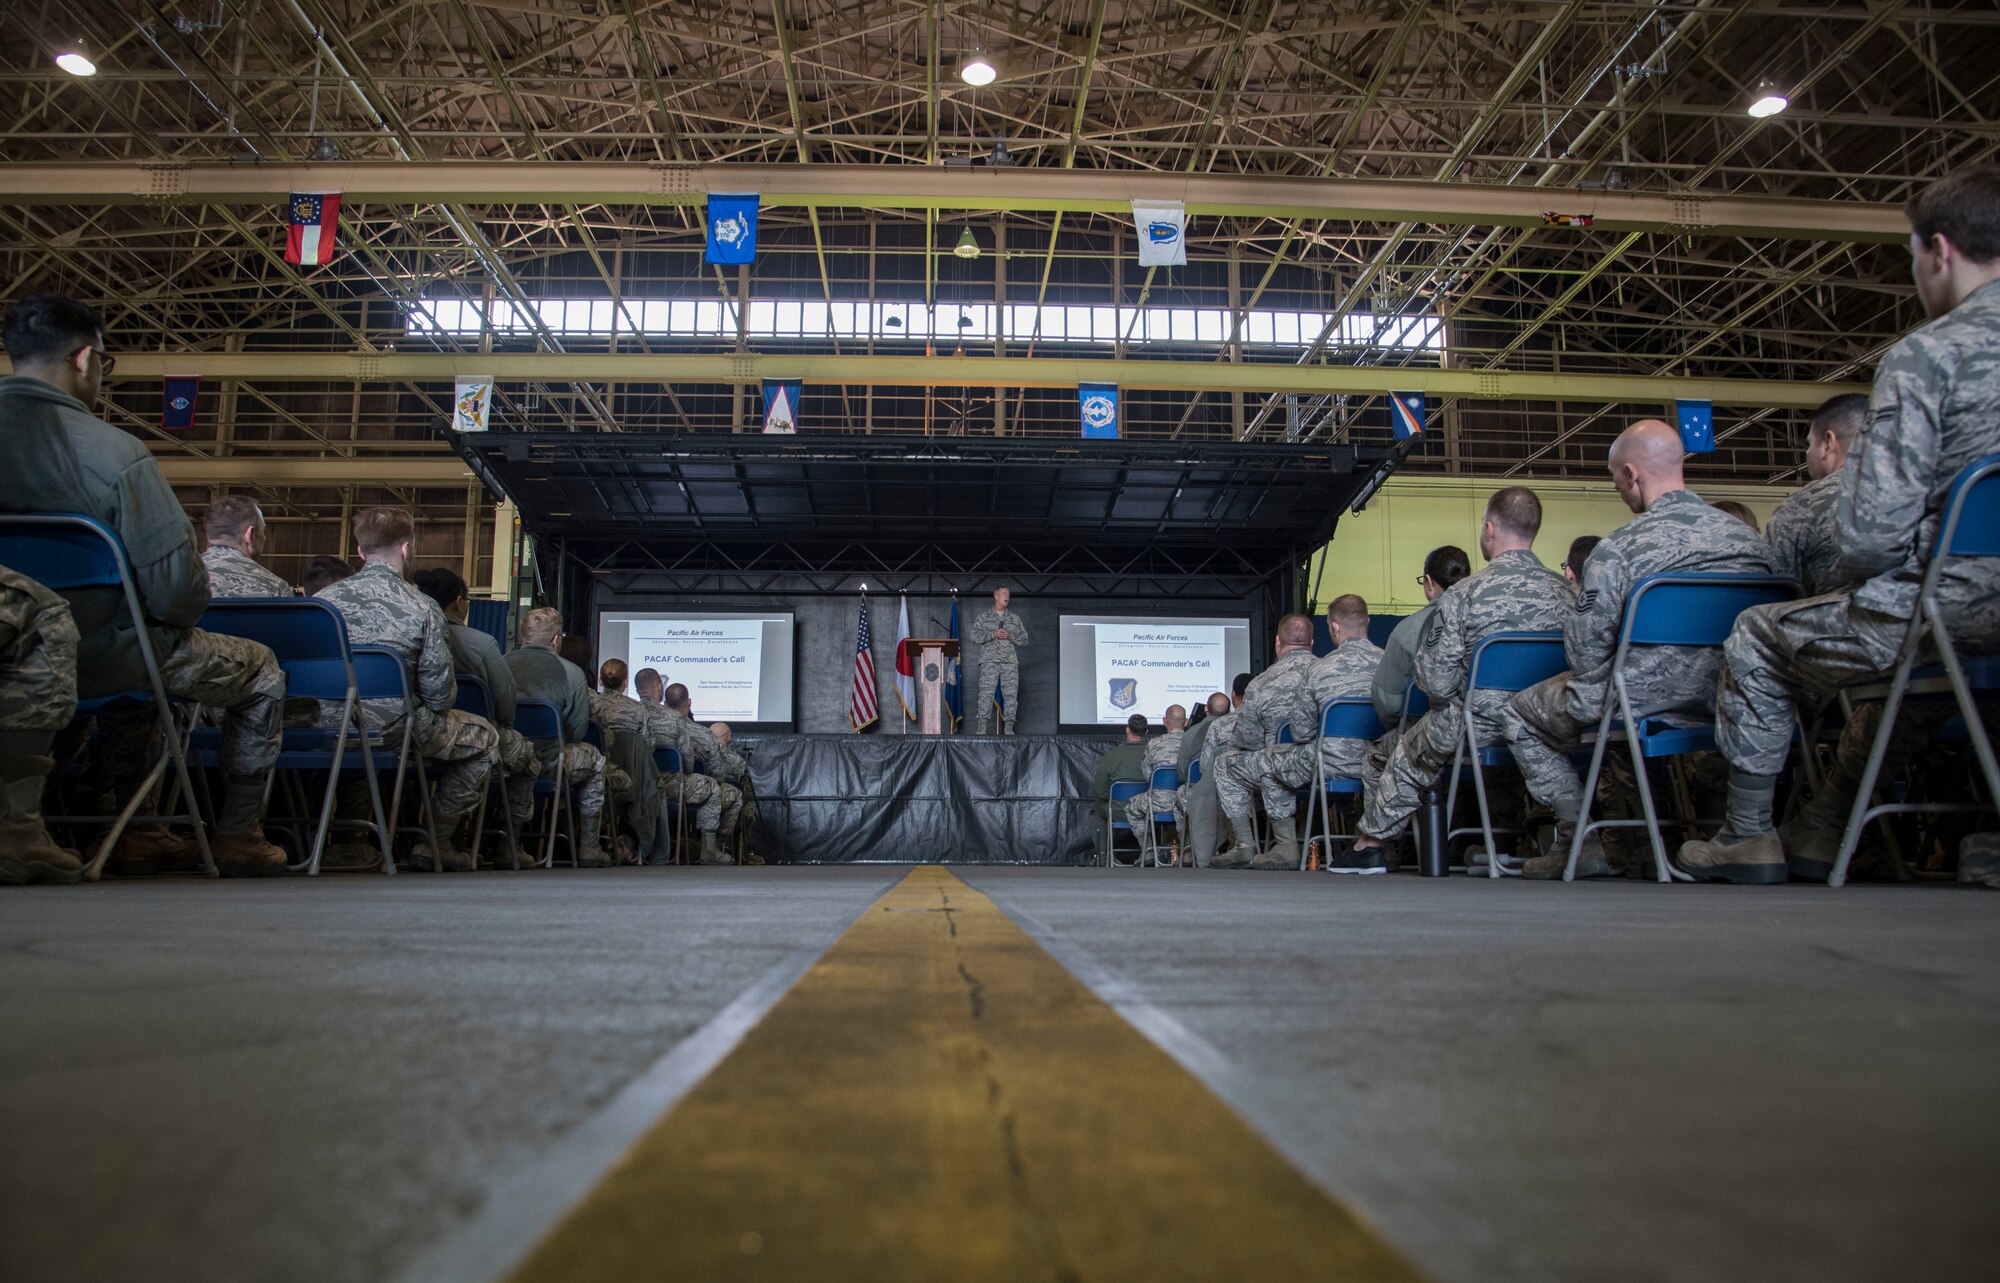 Service members listen as U.S. Air Force Gen. Terrence J. O’Shaughnessy, Pacific Air Forces commander, shares insight into his command’s vision, mission and goals for the future at Misawa Air Base, Japan, May 11, 2018. O’Shaughnessy thanked them for their efforts, which are vital role to regional security and stability. (U.S. Air Force photo by Senior Airman Sadie Colbert)